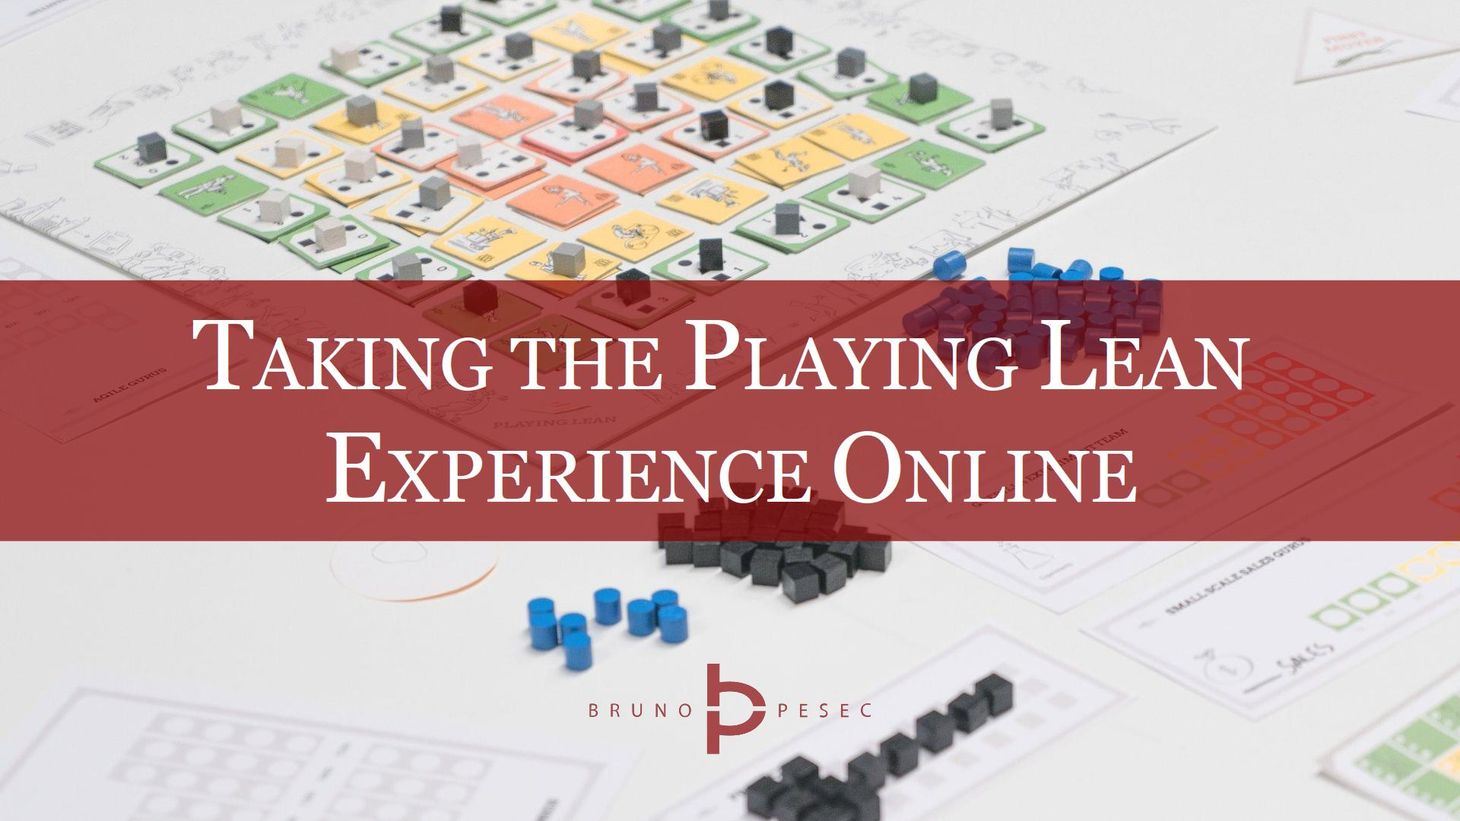 Taking the Playing Lean experience online